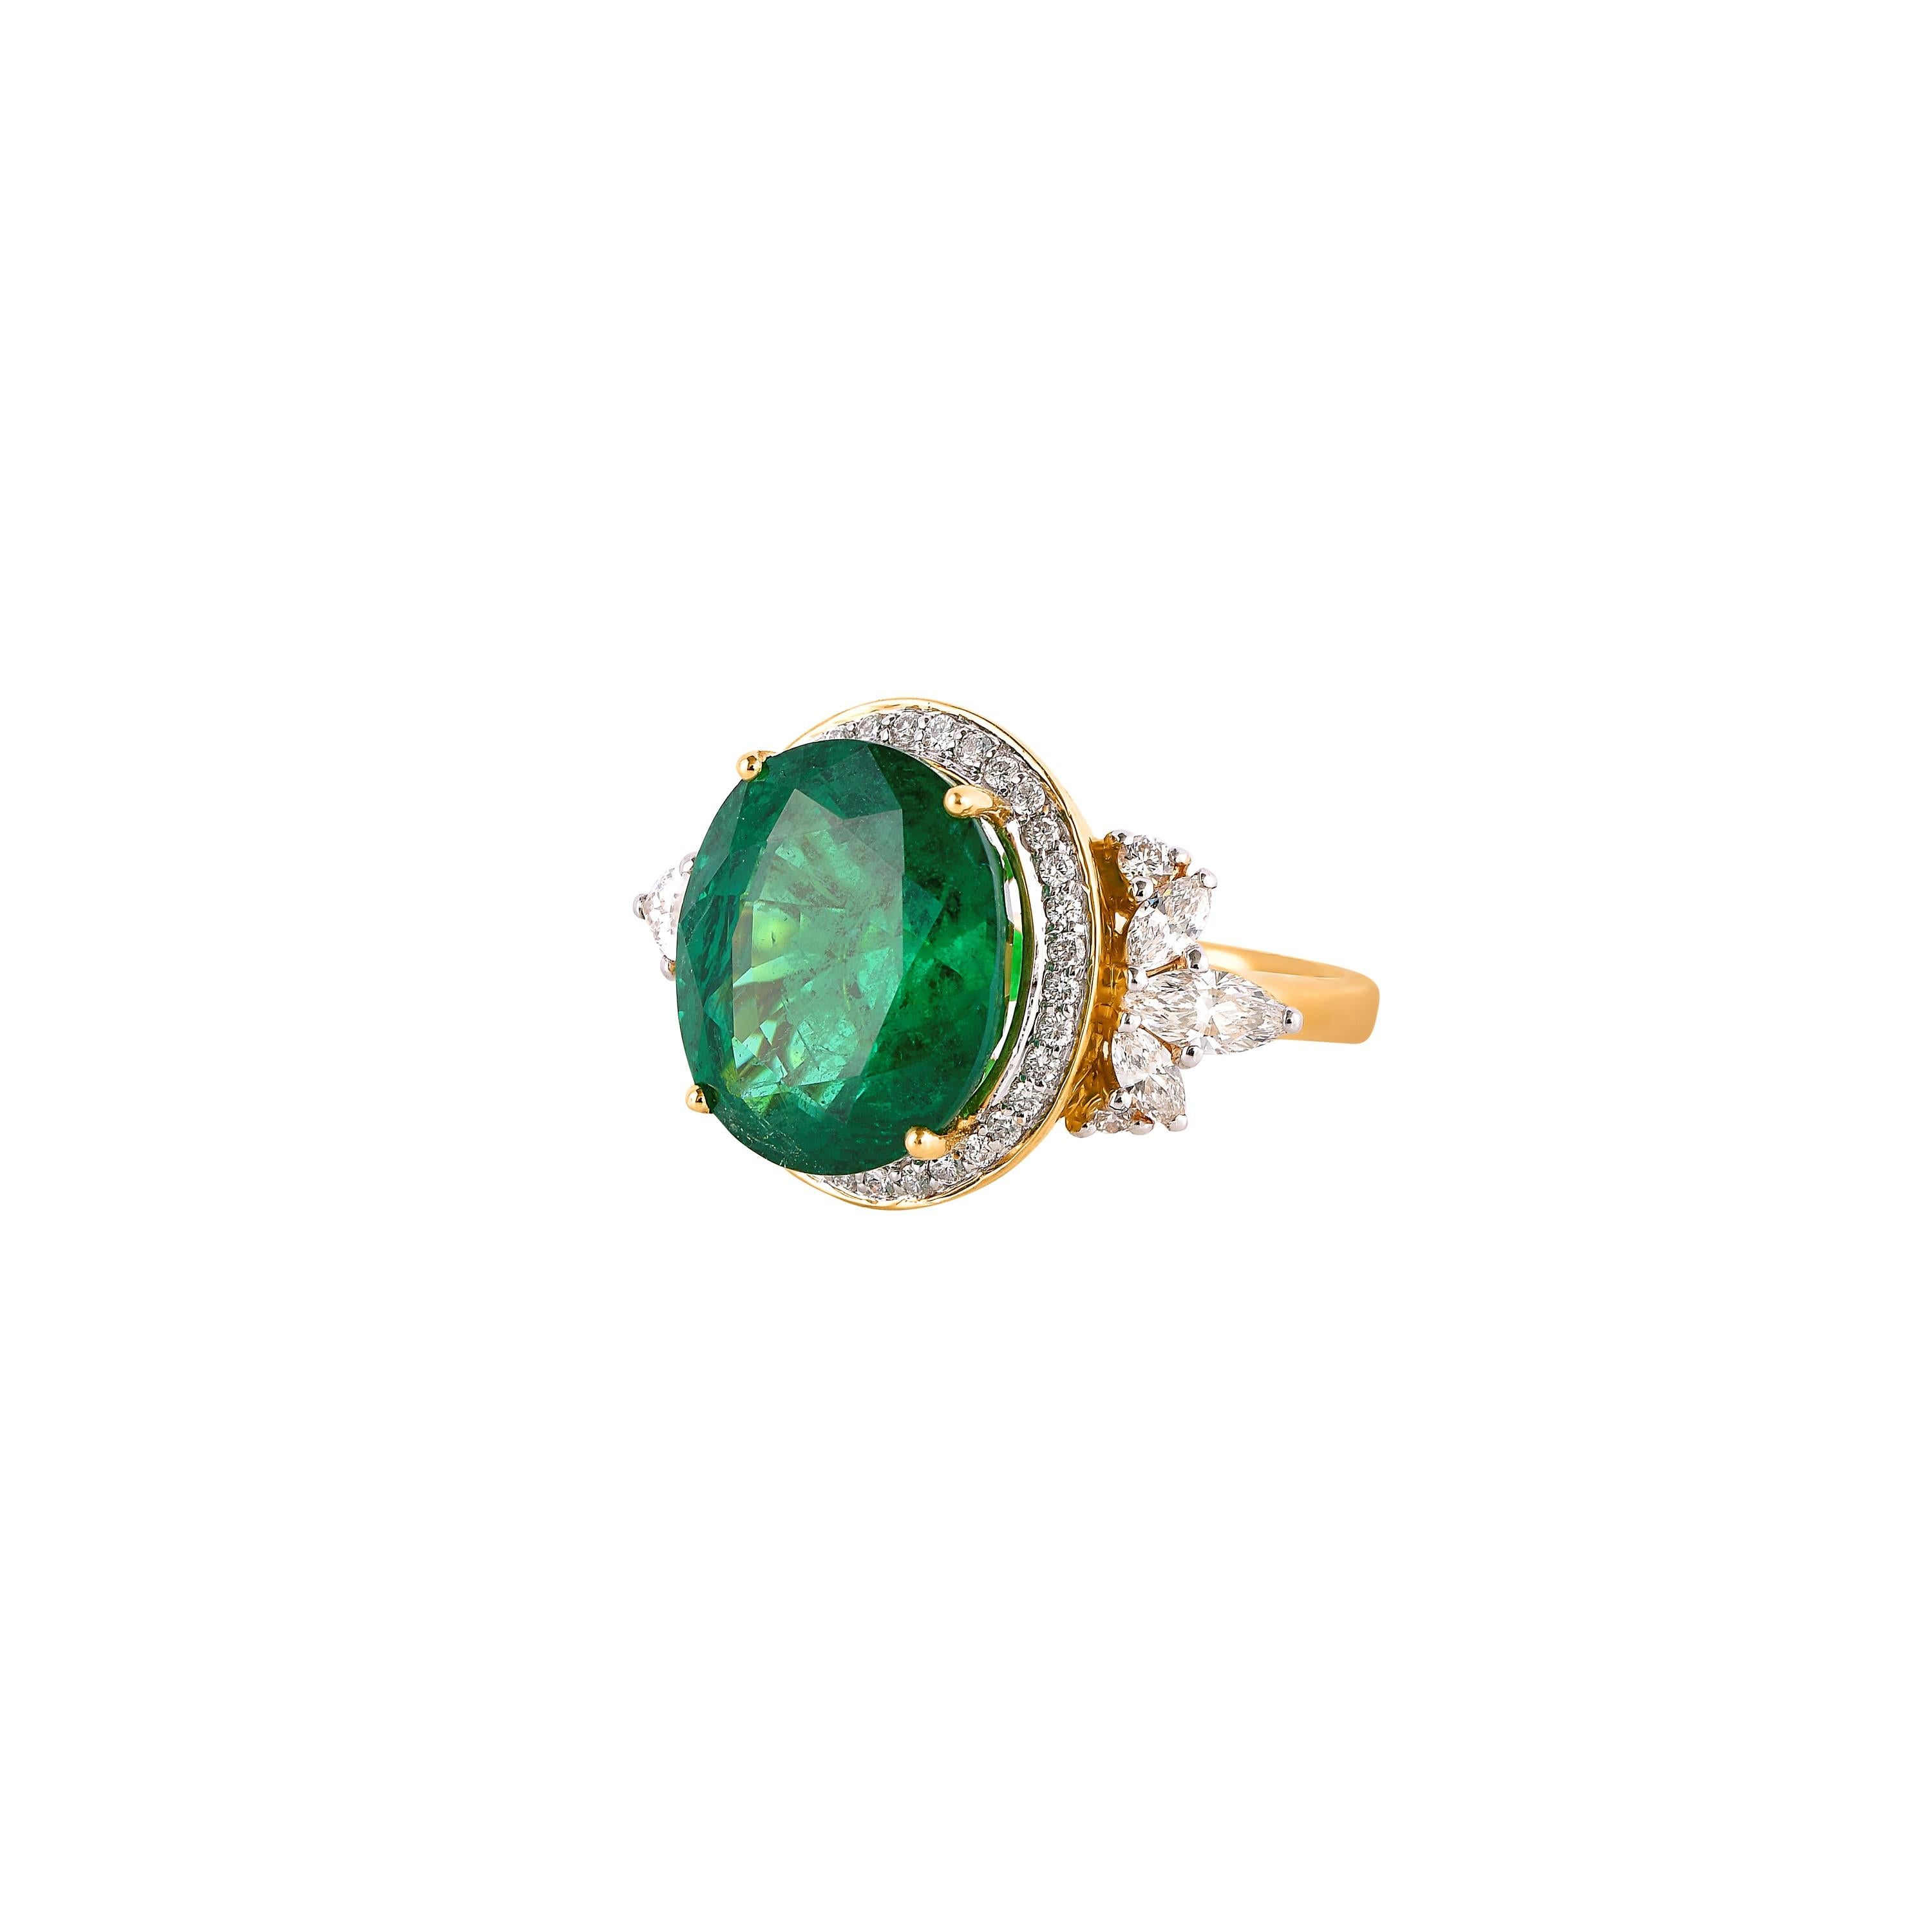 Showcasing the most vibrant Columbian and Zambian emeralds and diamonds, Sunita Nahata dedicates this collection to her home city of Jaipur where the jewelry industry dates back to the early 1700s. Jaipur is also an epicenter for the global emerald